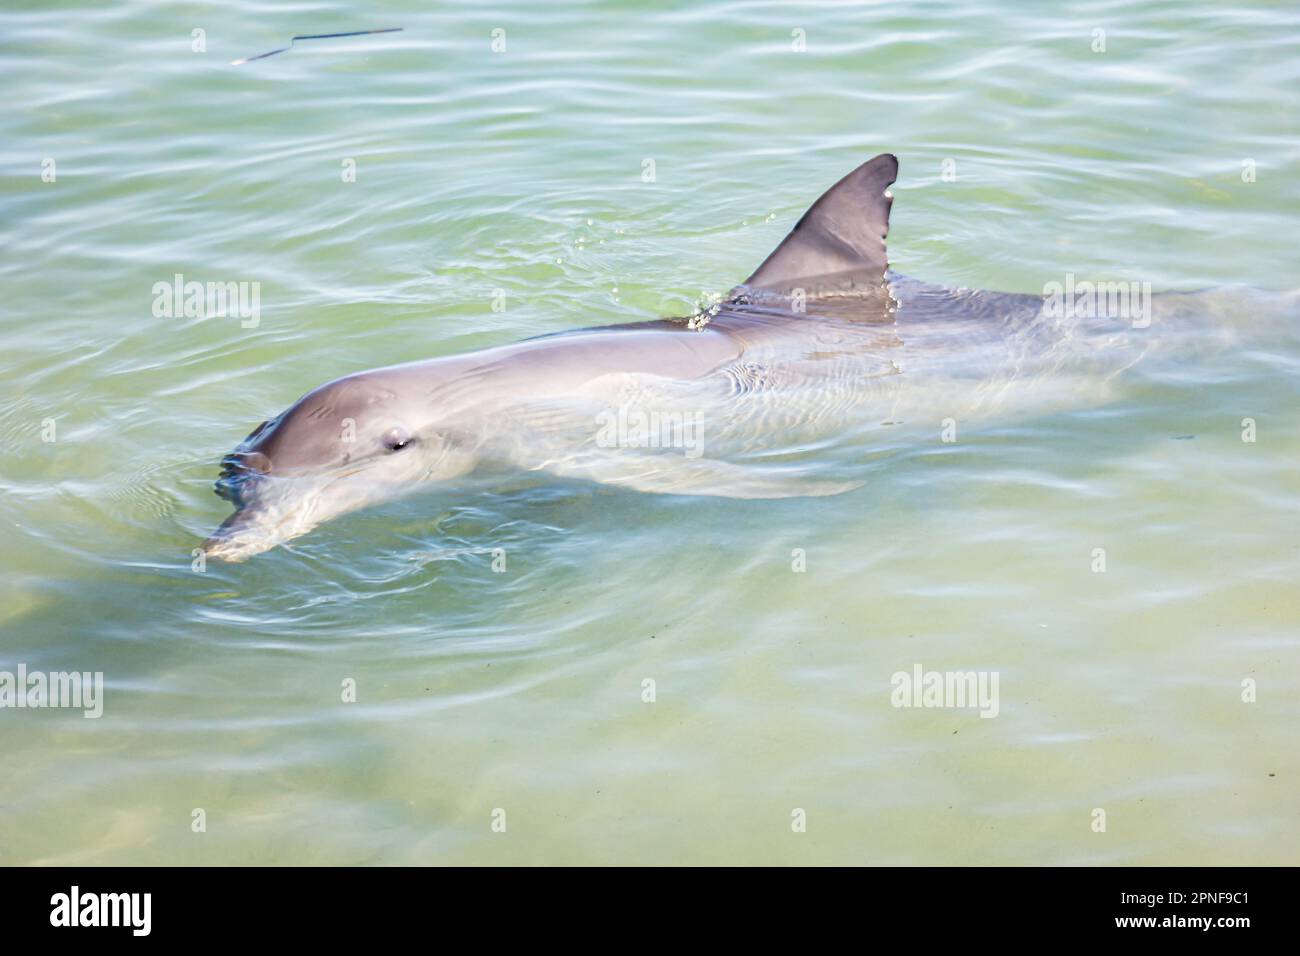 A dolphin swimming in the shallow water of Monkey Mia in Shark Bay of Western Australia, Australia. Stock Photo